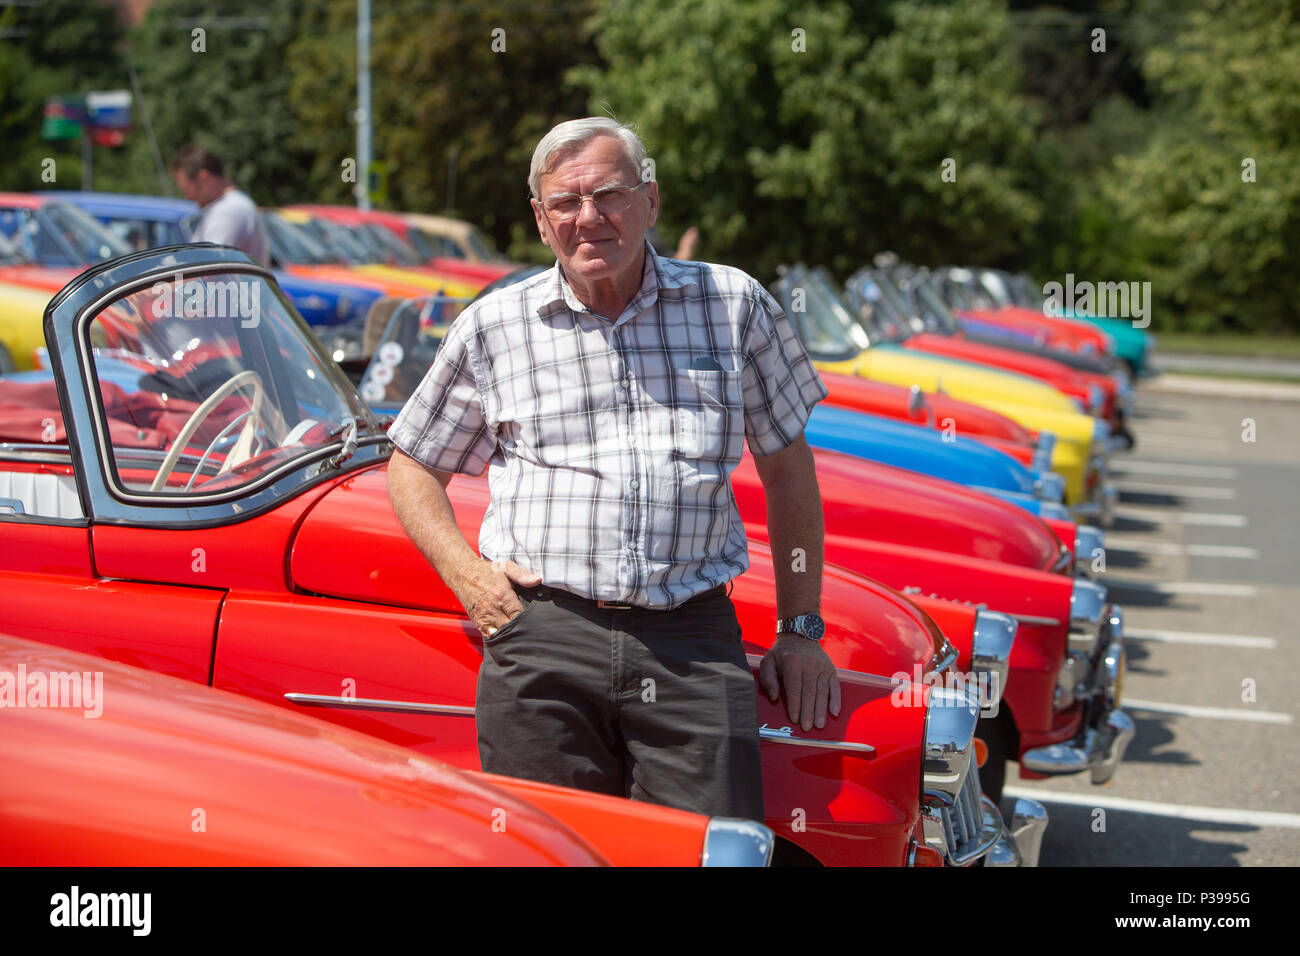 Zlin, Czech Republic. 16th June, 2018. Some 60 sports cars of Skoda brand, mostly historical model Felicia, participated 53rd meeting of Skoda sports cars in Zlin, Czech Republic, on June 16, 2018. On the photo is seen participant of the meeting Josef Omelka, owner of Felicia from 1960. Credit: Josef Omelka/CTK Photo/Alamy Live News Stock Photo